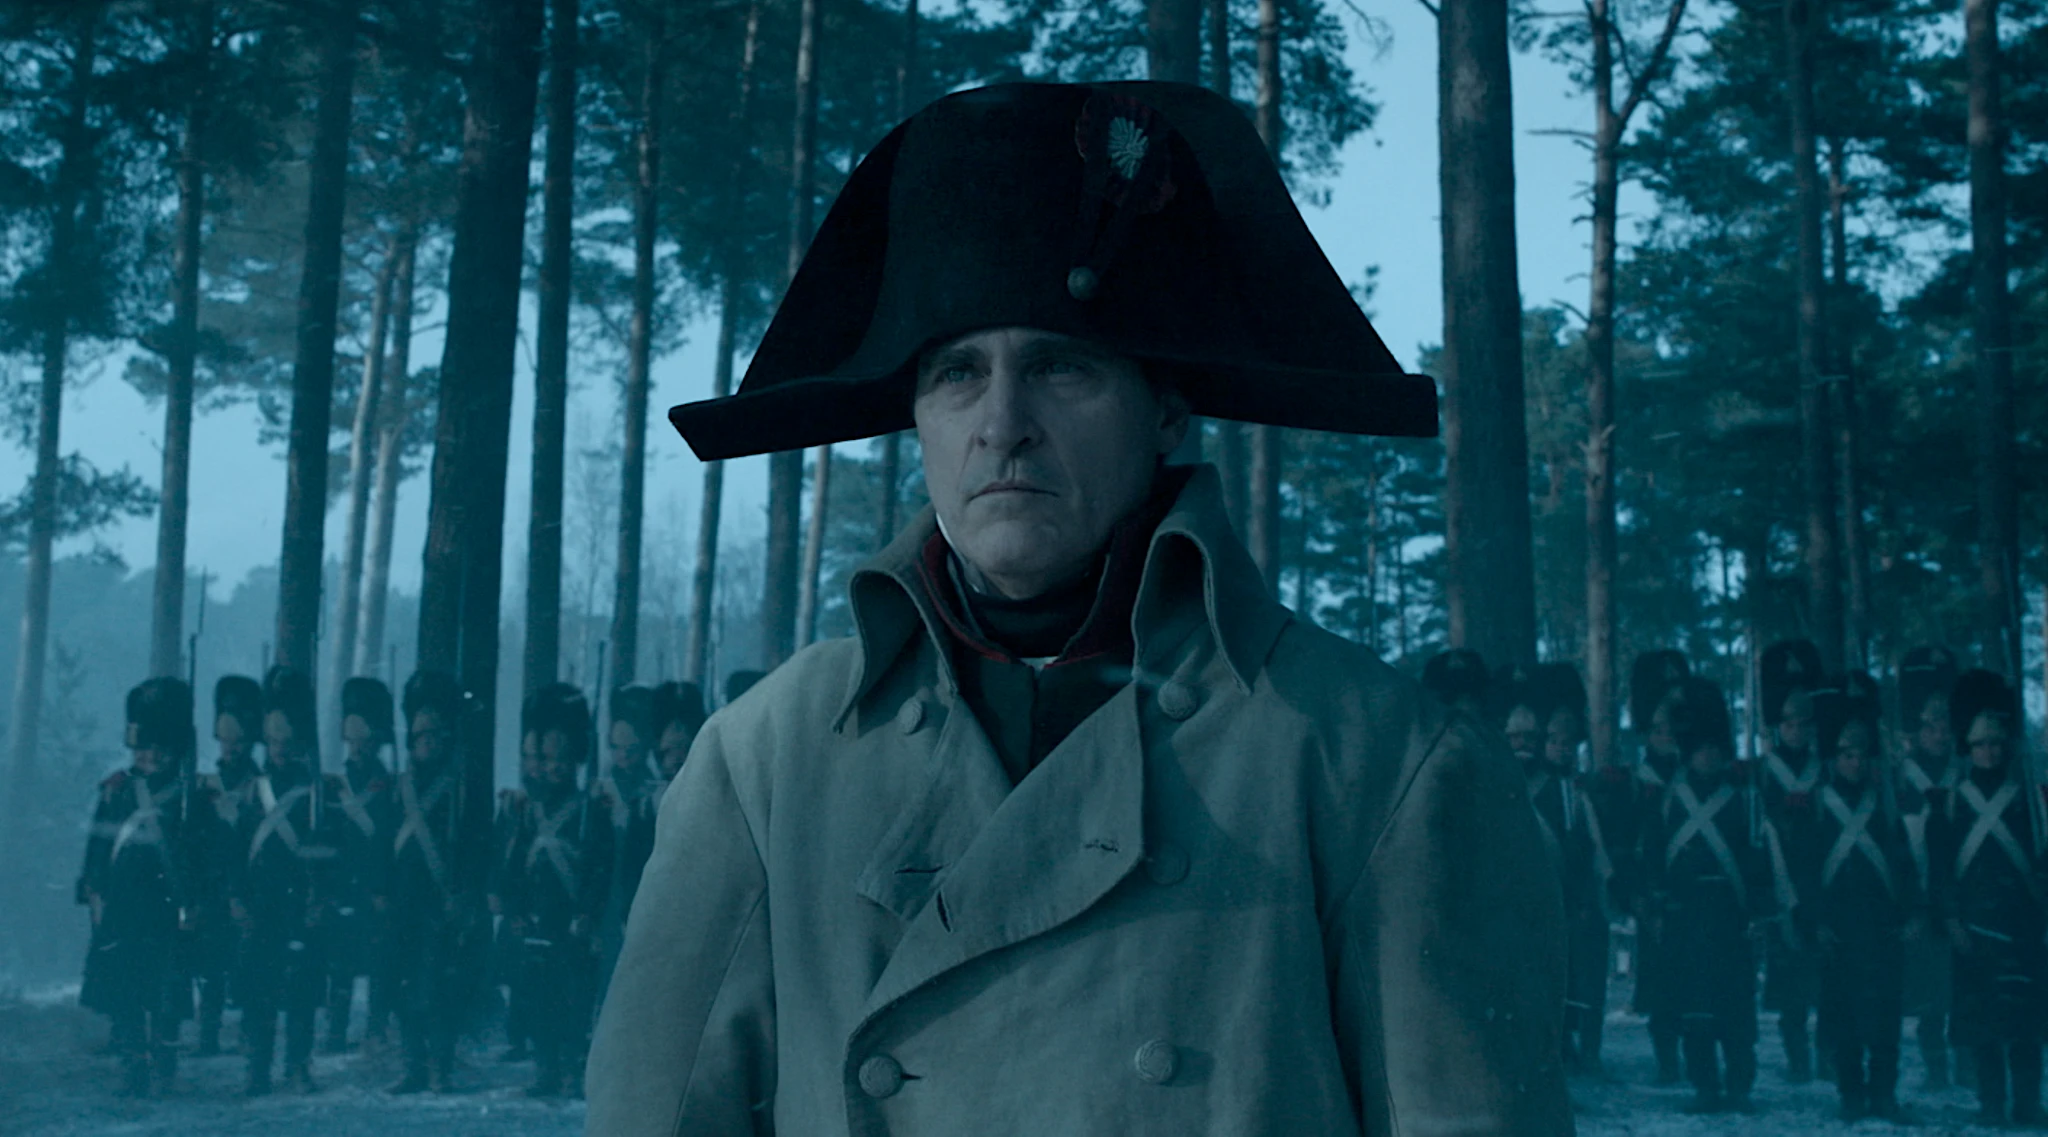 'Napoleon' Trailer: Ridley Scott Casts Joaquin Phoenix in Another Historical Epic